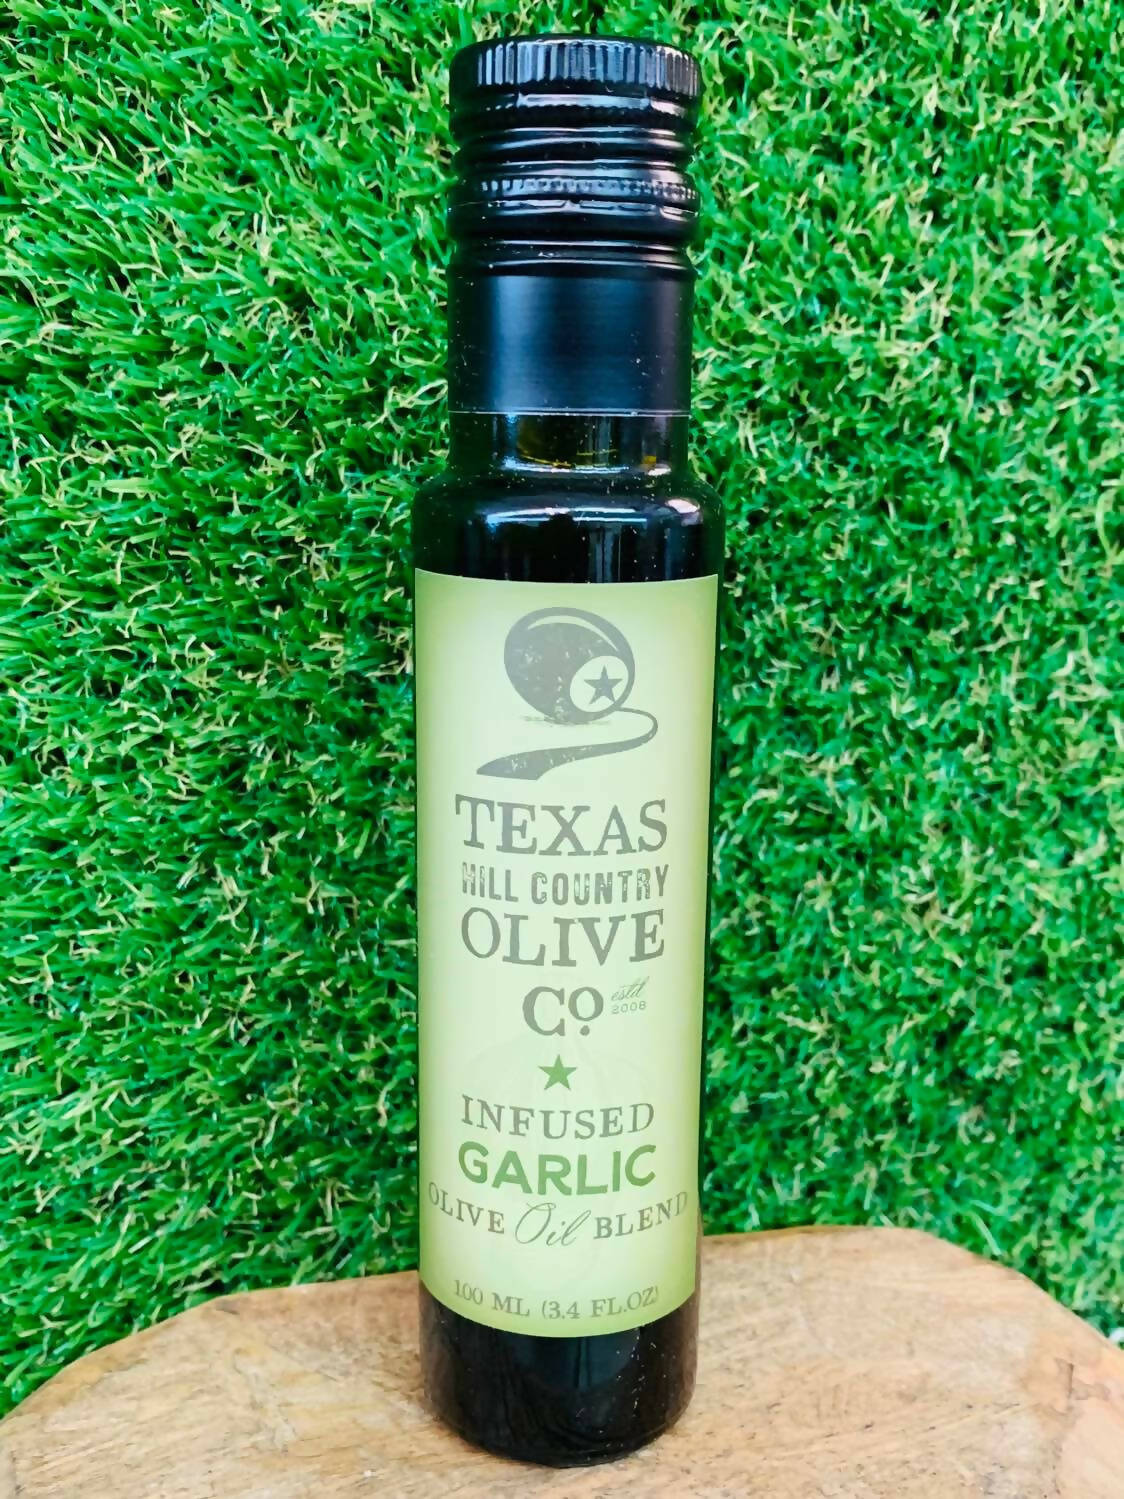 Texas Hill Country Olive Oil Co.